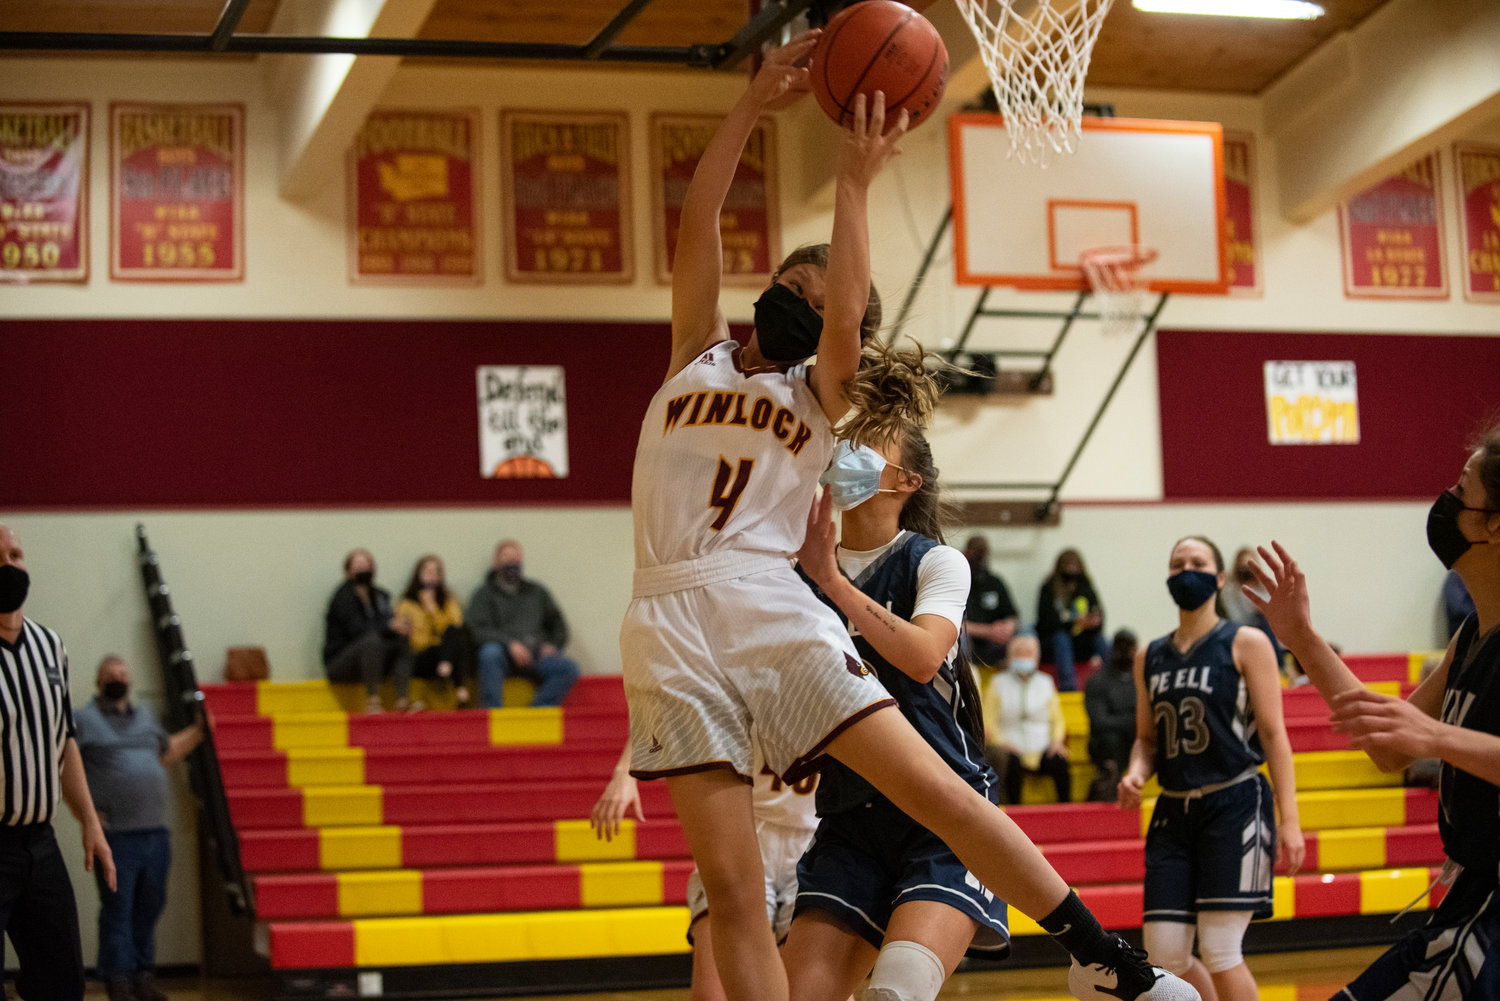 Winlock's Kindyl Kelly pulls down an offensive rebound against Pe Ell on Saturday.